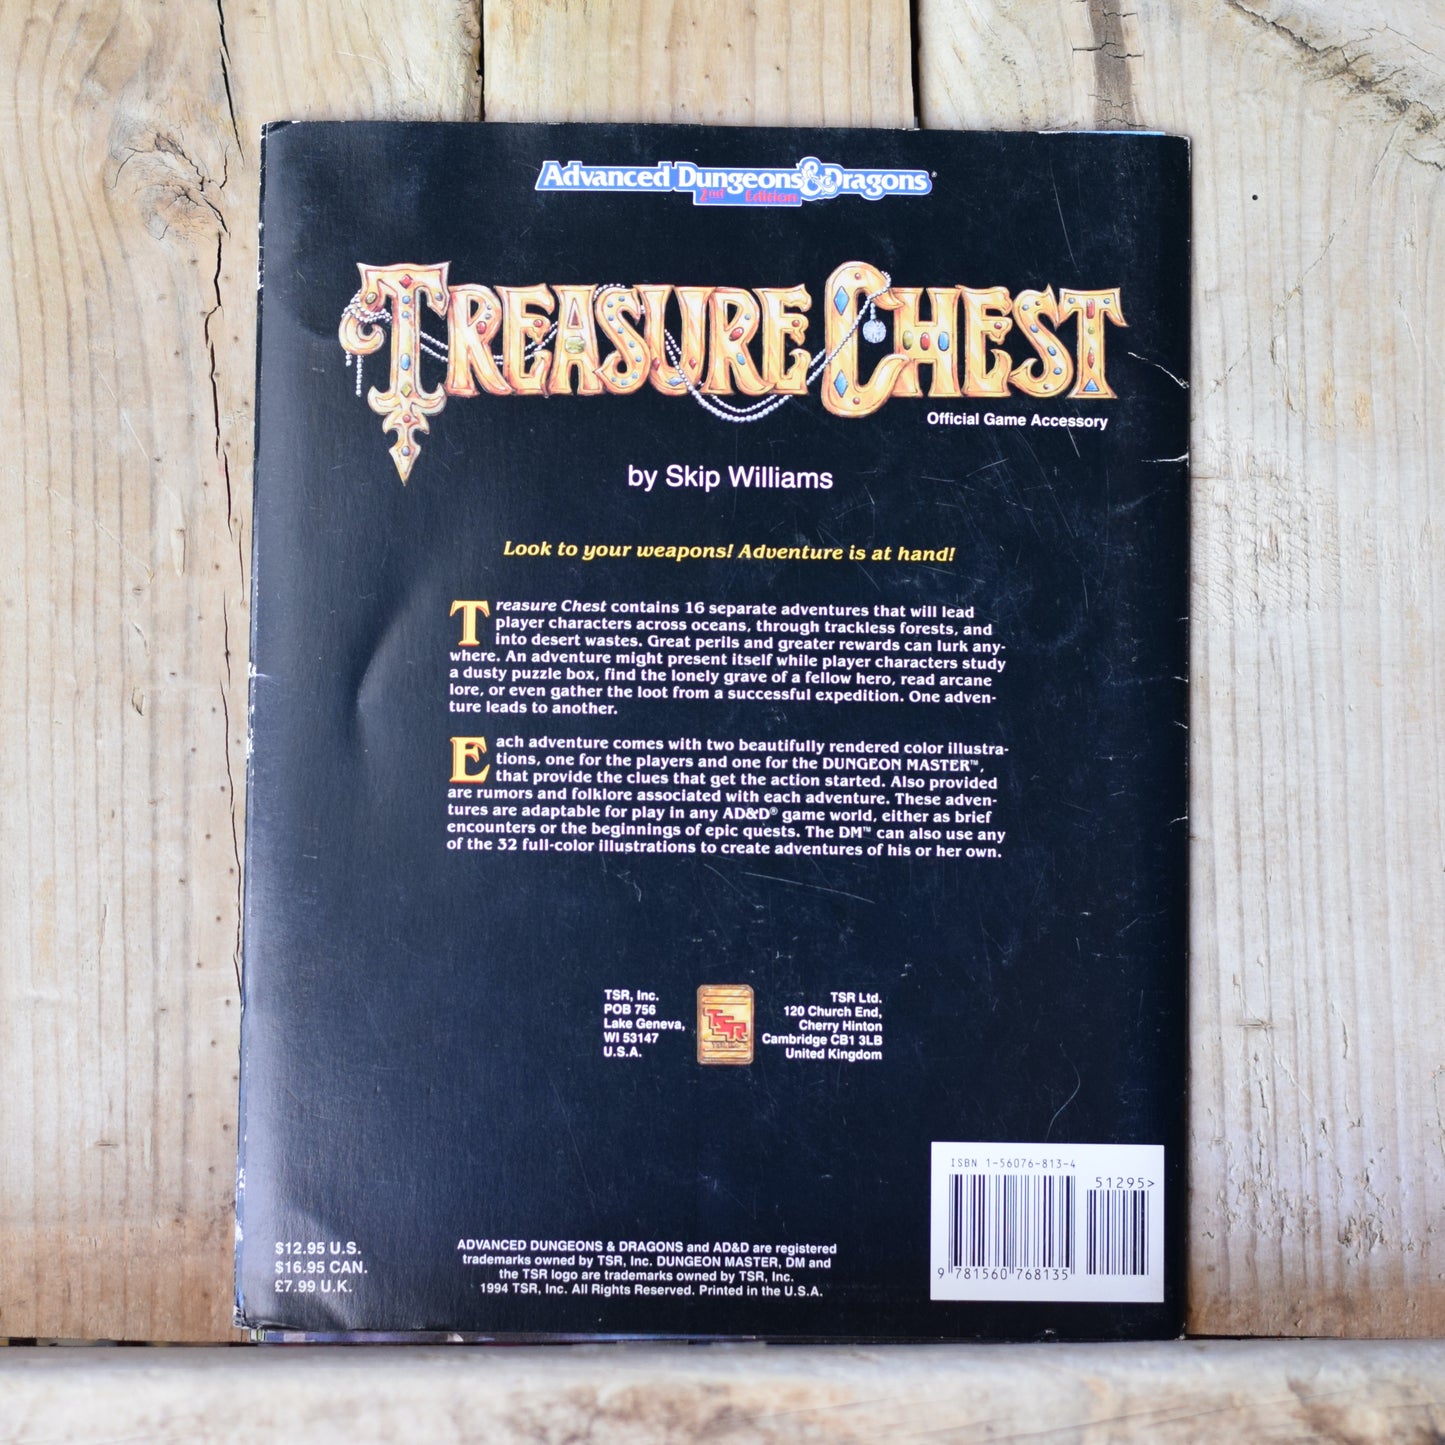 Vintage Dungeons and Dragons RPG Book: AD&D 2e Treasure Chest by Skip Williams Official Adventure